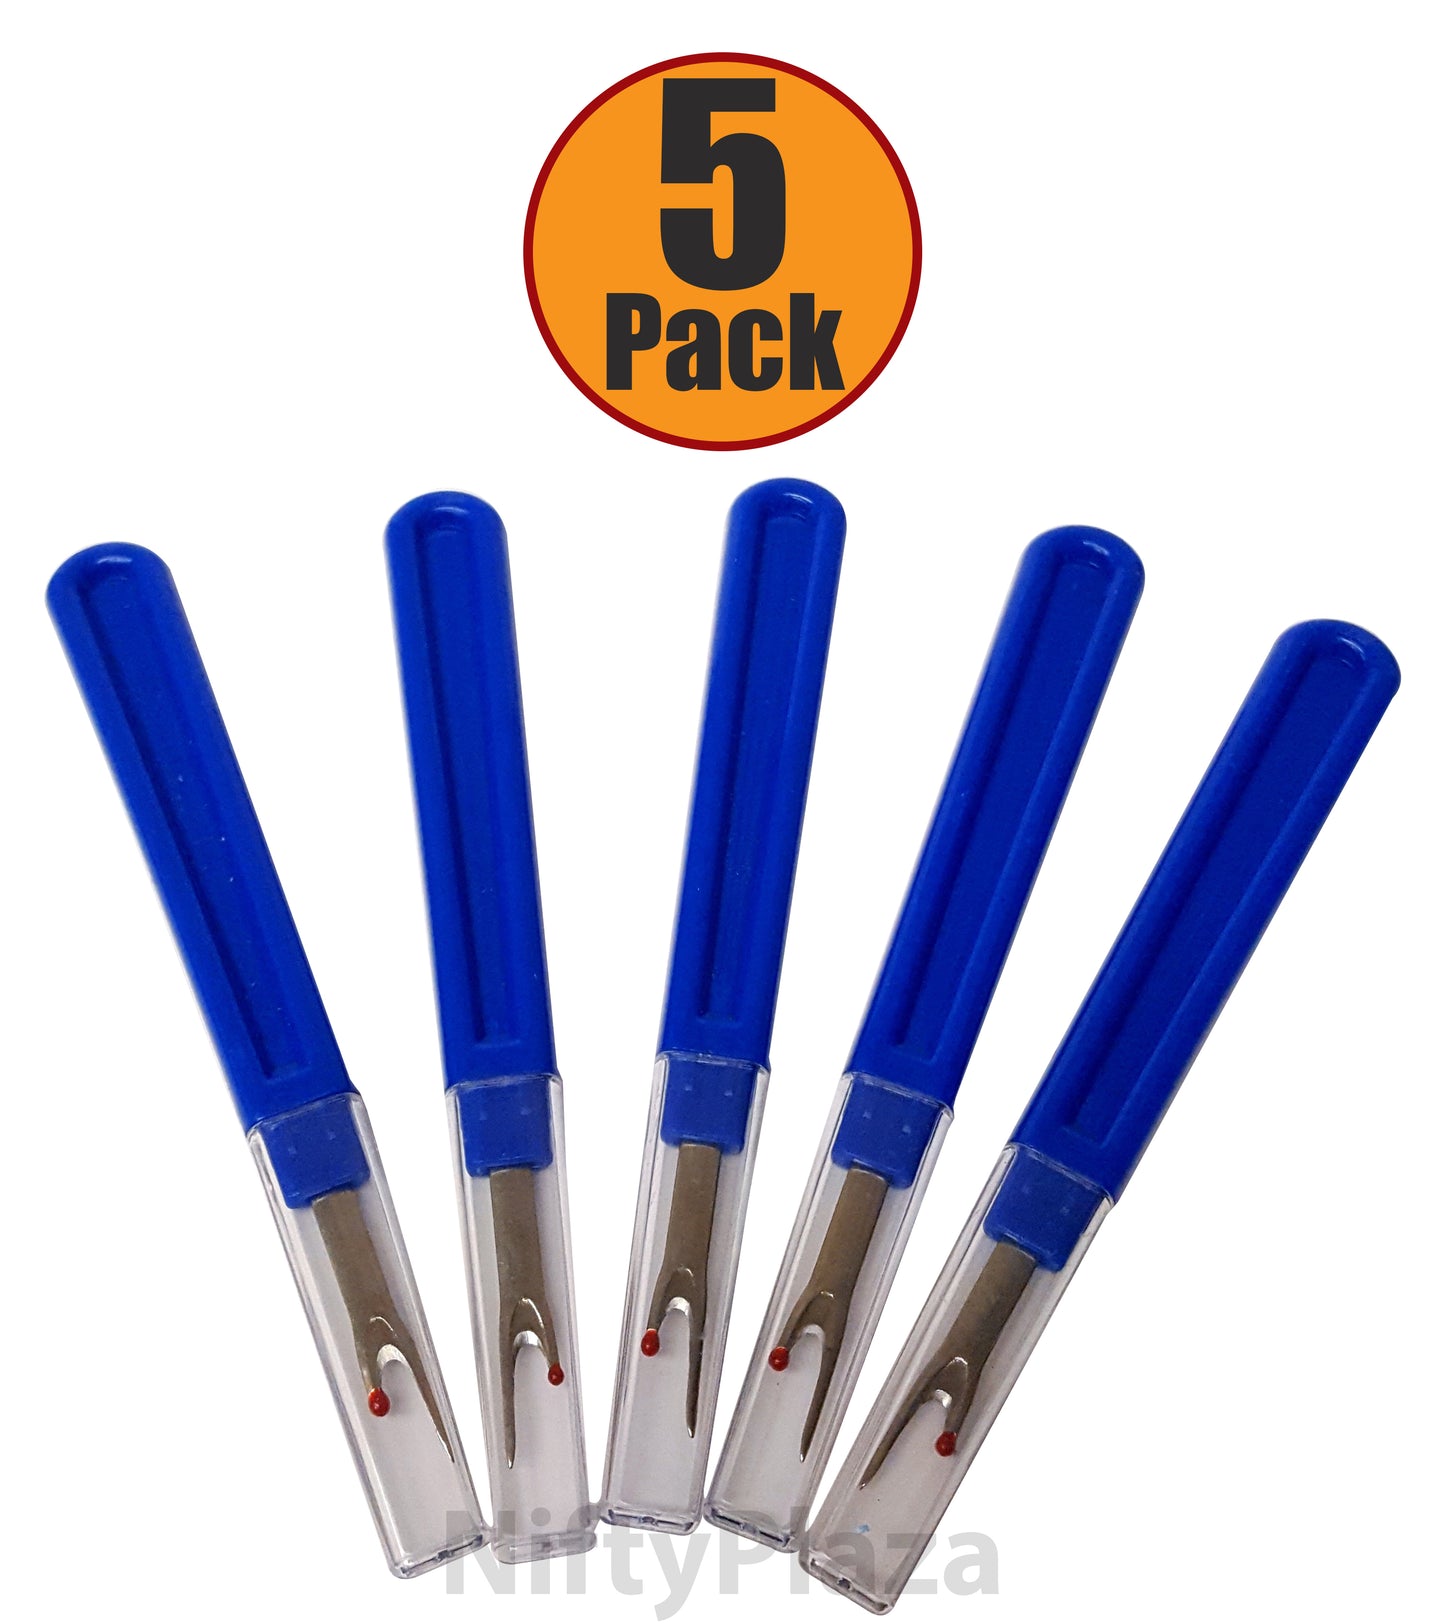 Seam Ripper Sharp STEEL TIP 5 ¼ Inch PREMIUM QUALITY with Safety Lid - 5 Pack